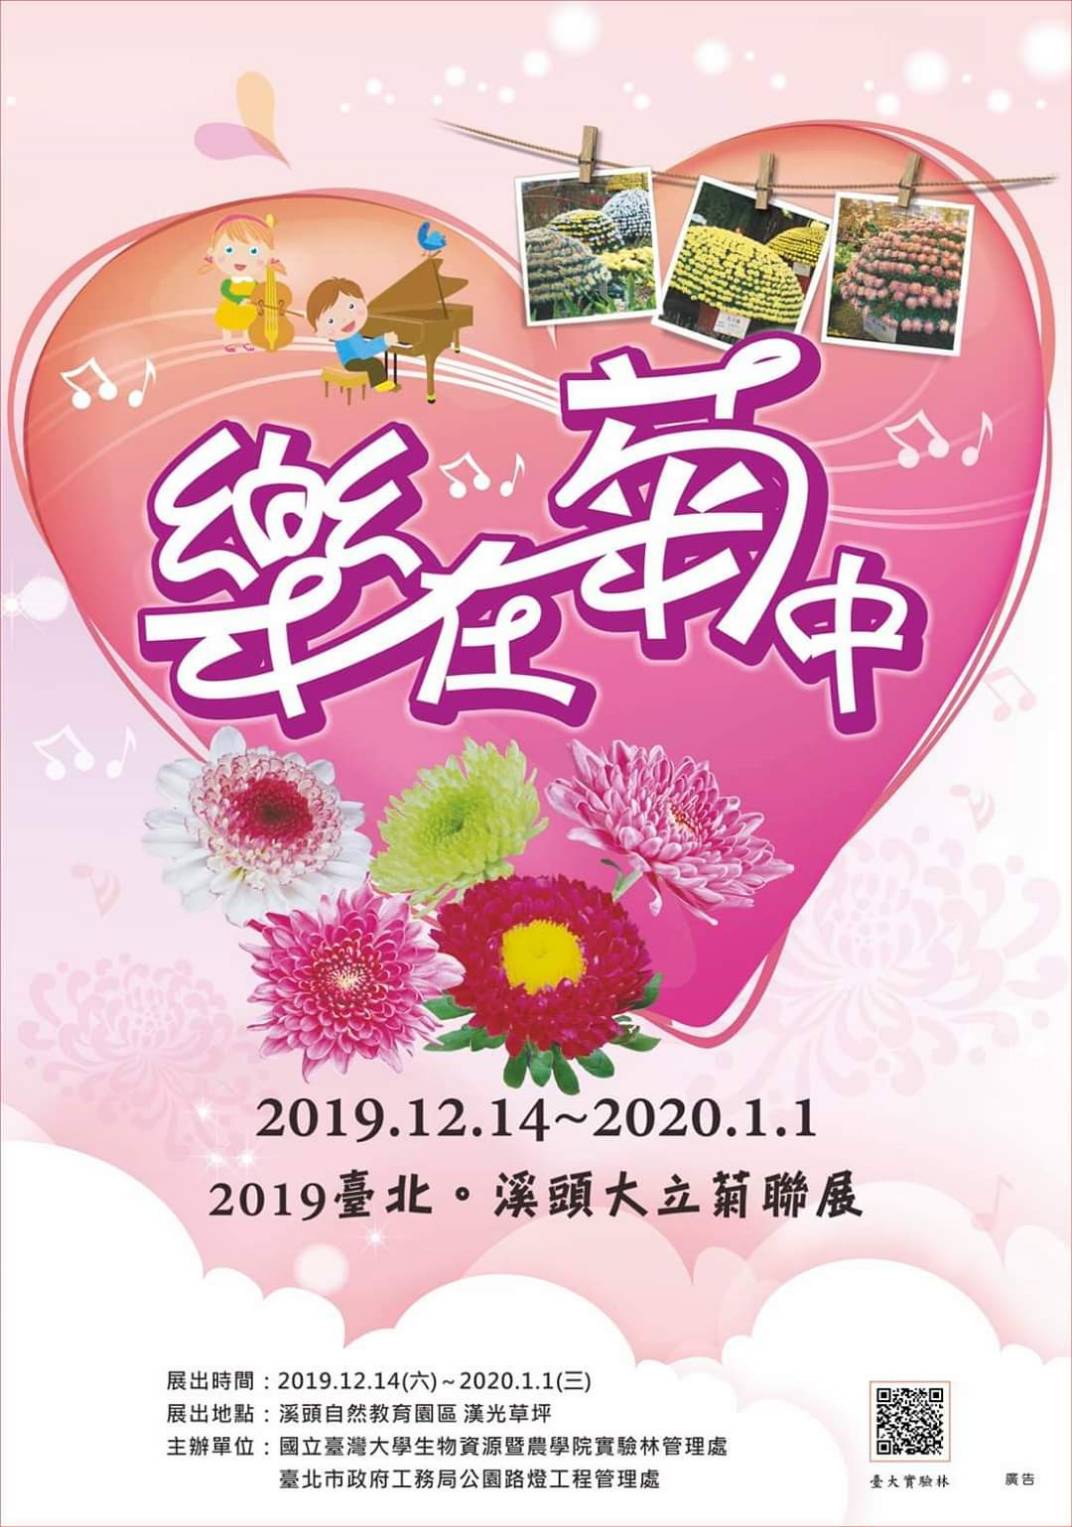 PSLO supports Chrysanthemum event at Xitou